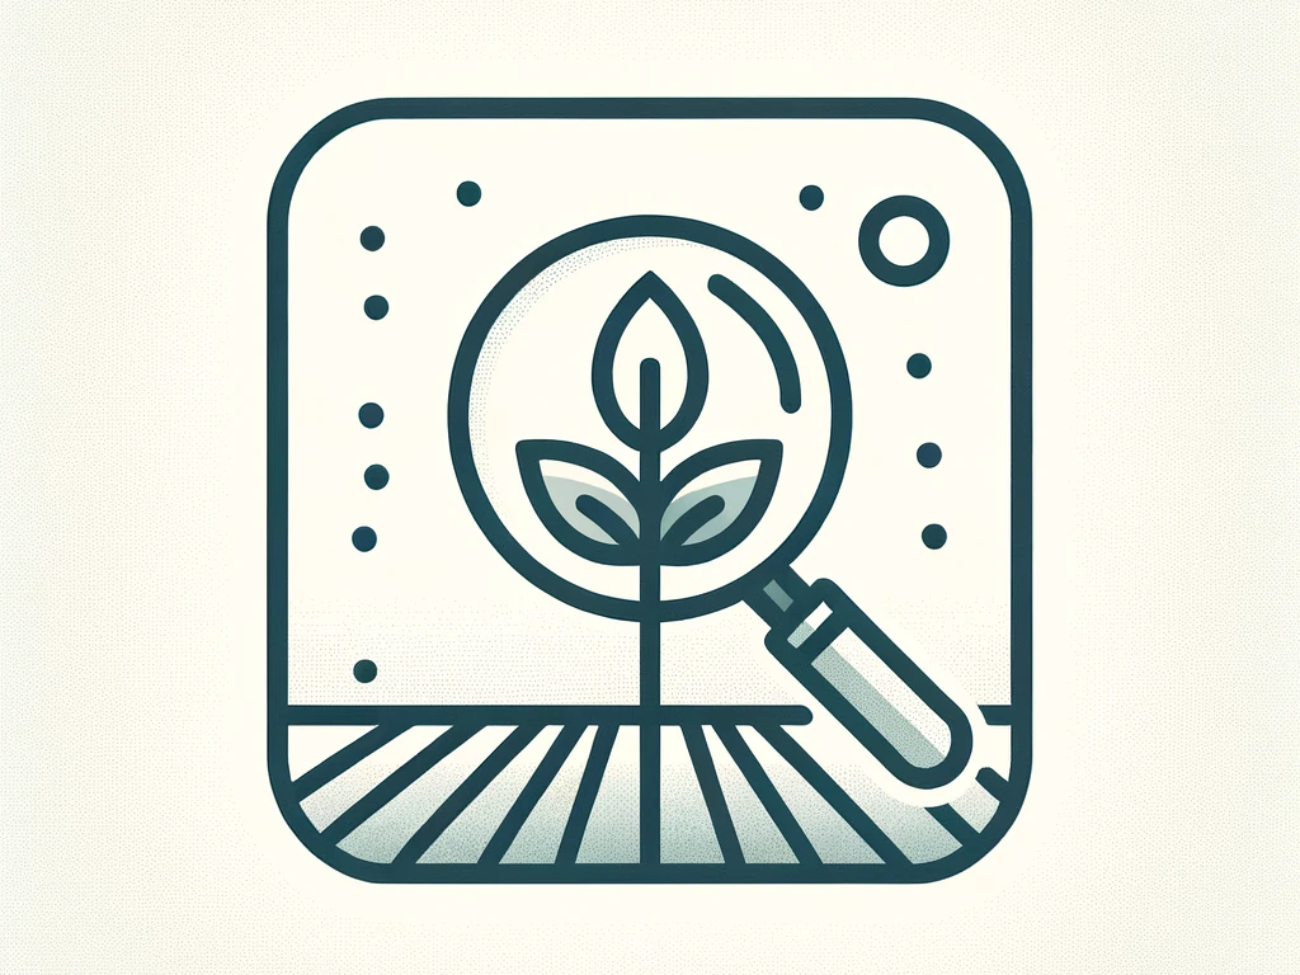 DALL·E 2024-05-17 10.15.09 - A minimalistic square illustration representing agricultural research and development. The illustration features a stylized plant or crop growing with